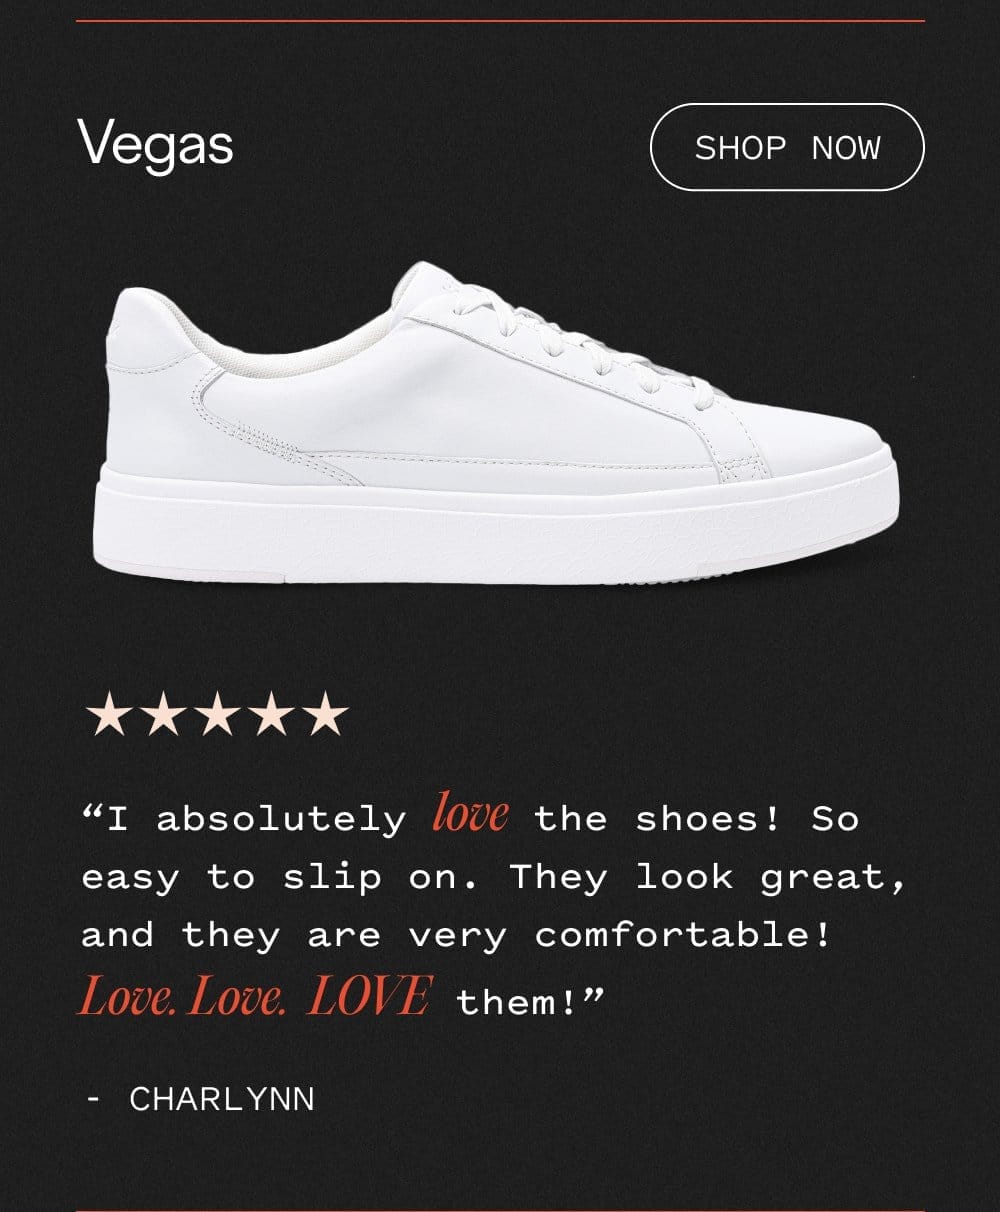 Vegas - Shop now. I absolutely LOVE the shoes! So easy to slip on. They look great, and they are very comfortable! LOVE LOVE LOVE them!